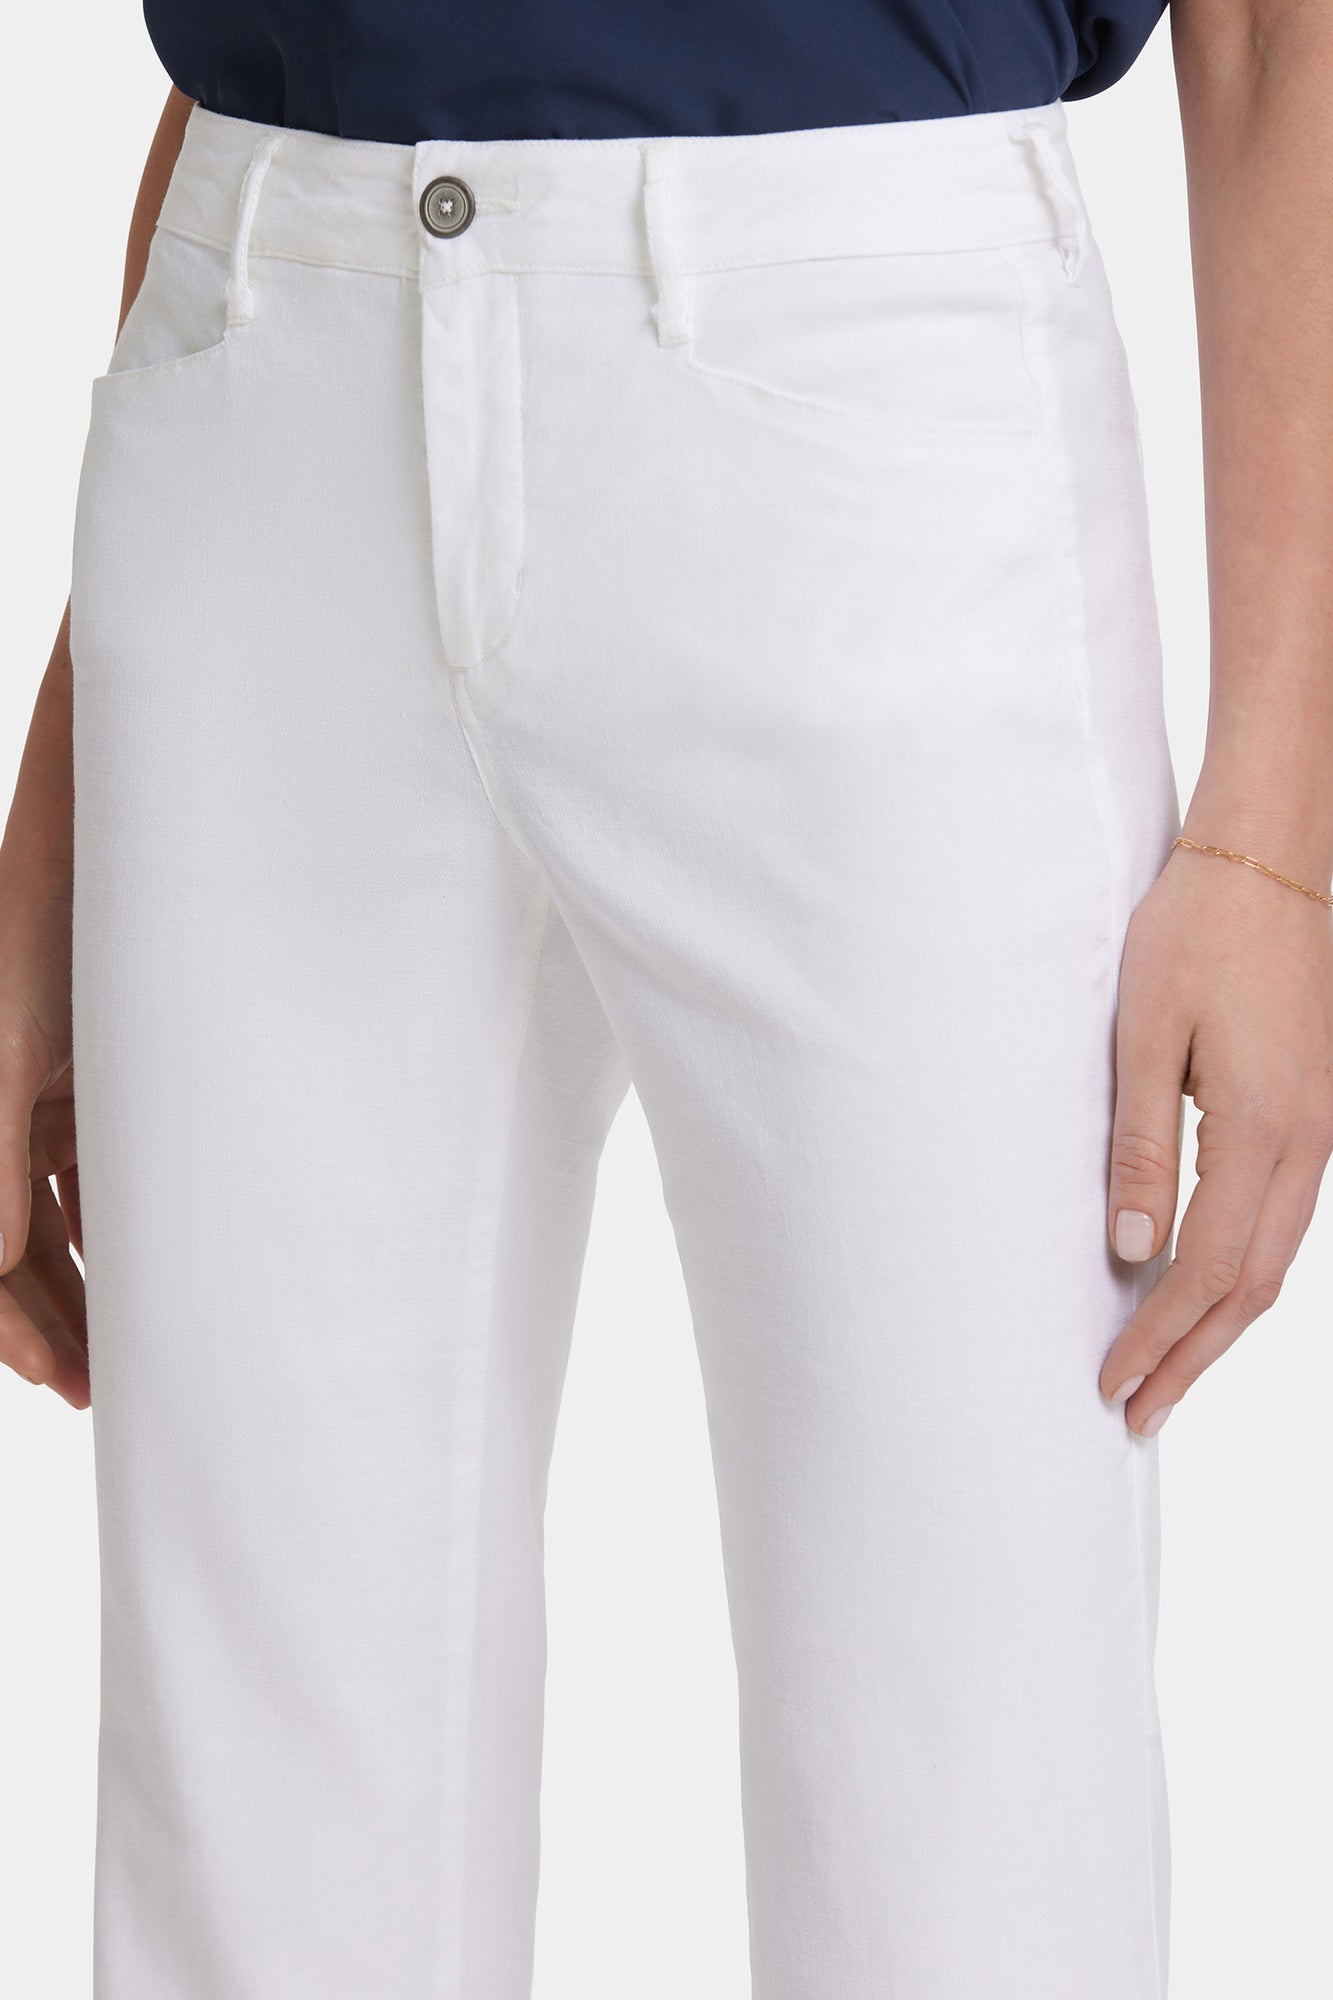 NYDJ Trouser Pants In Stretch Linen - Optic White